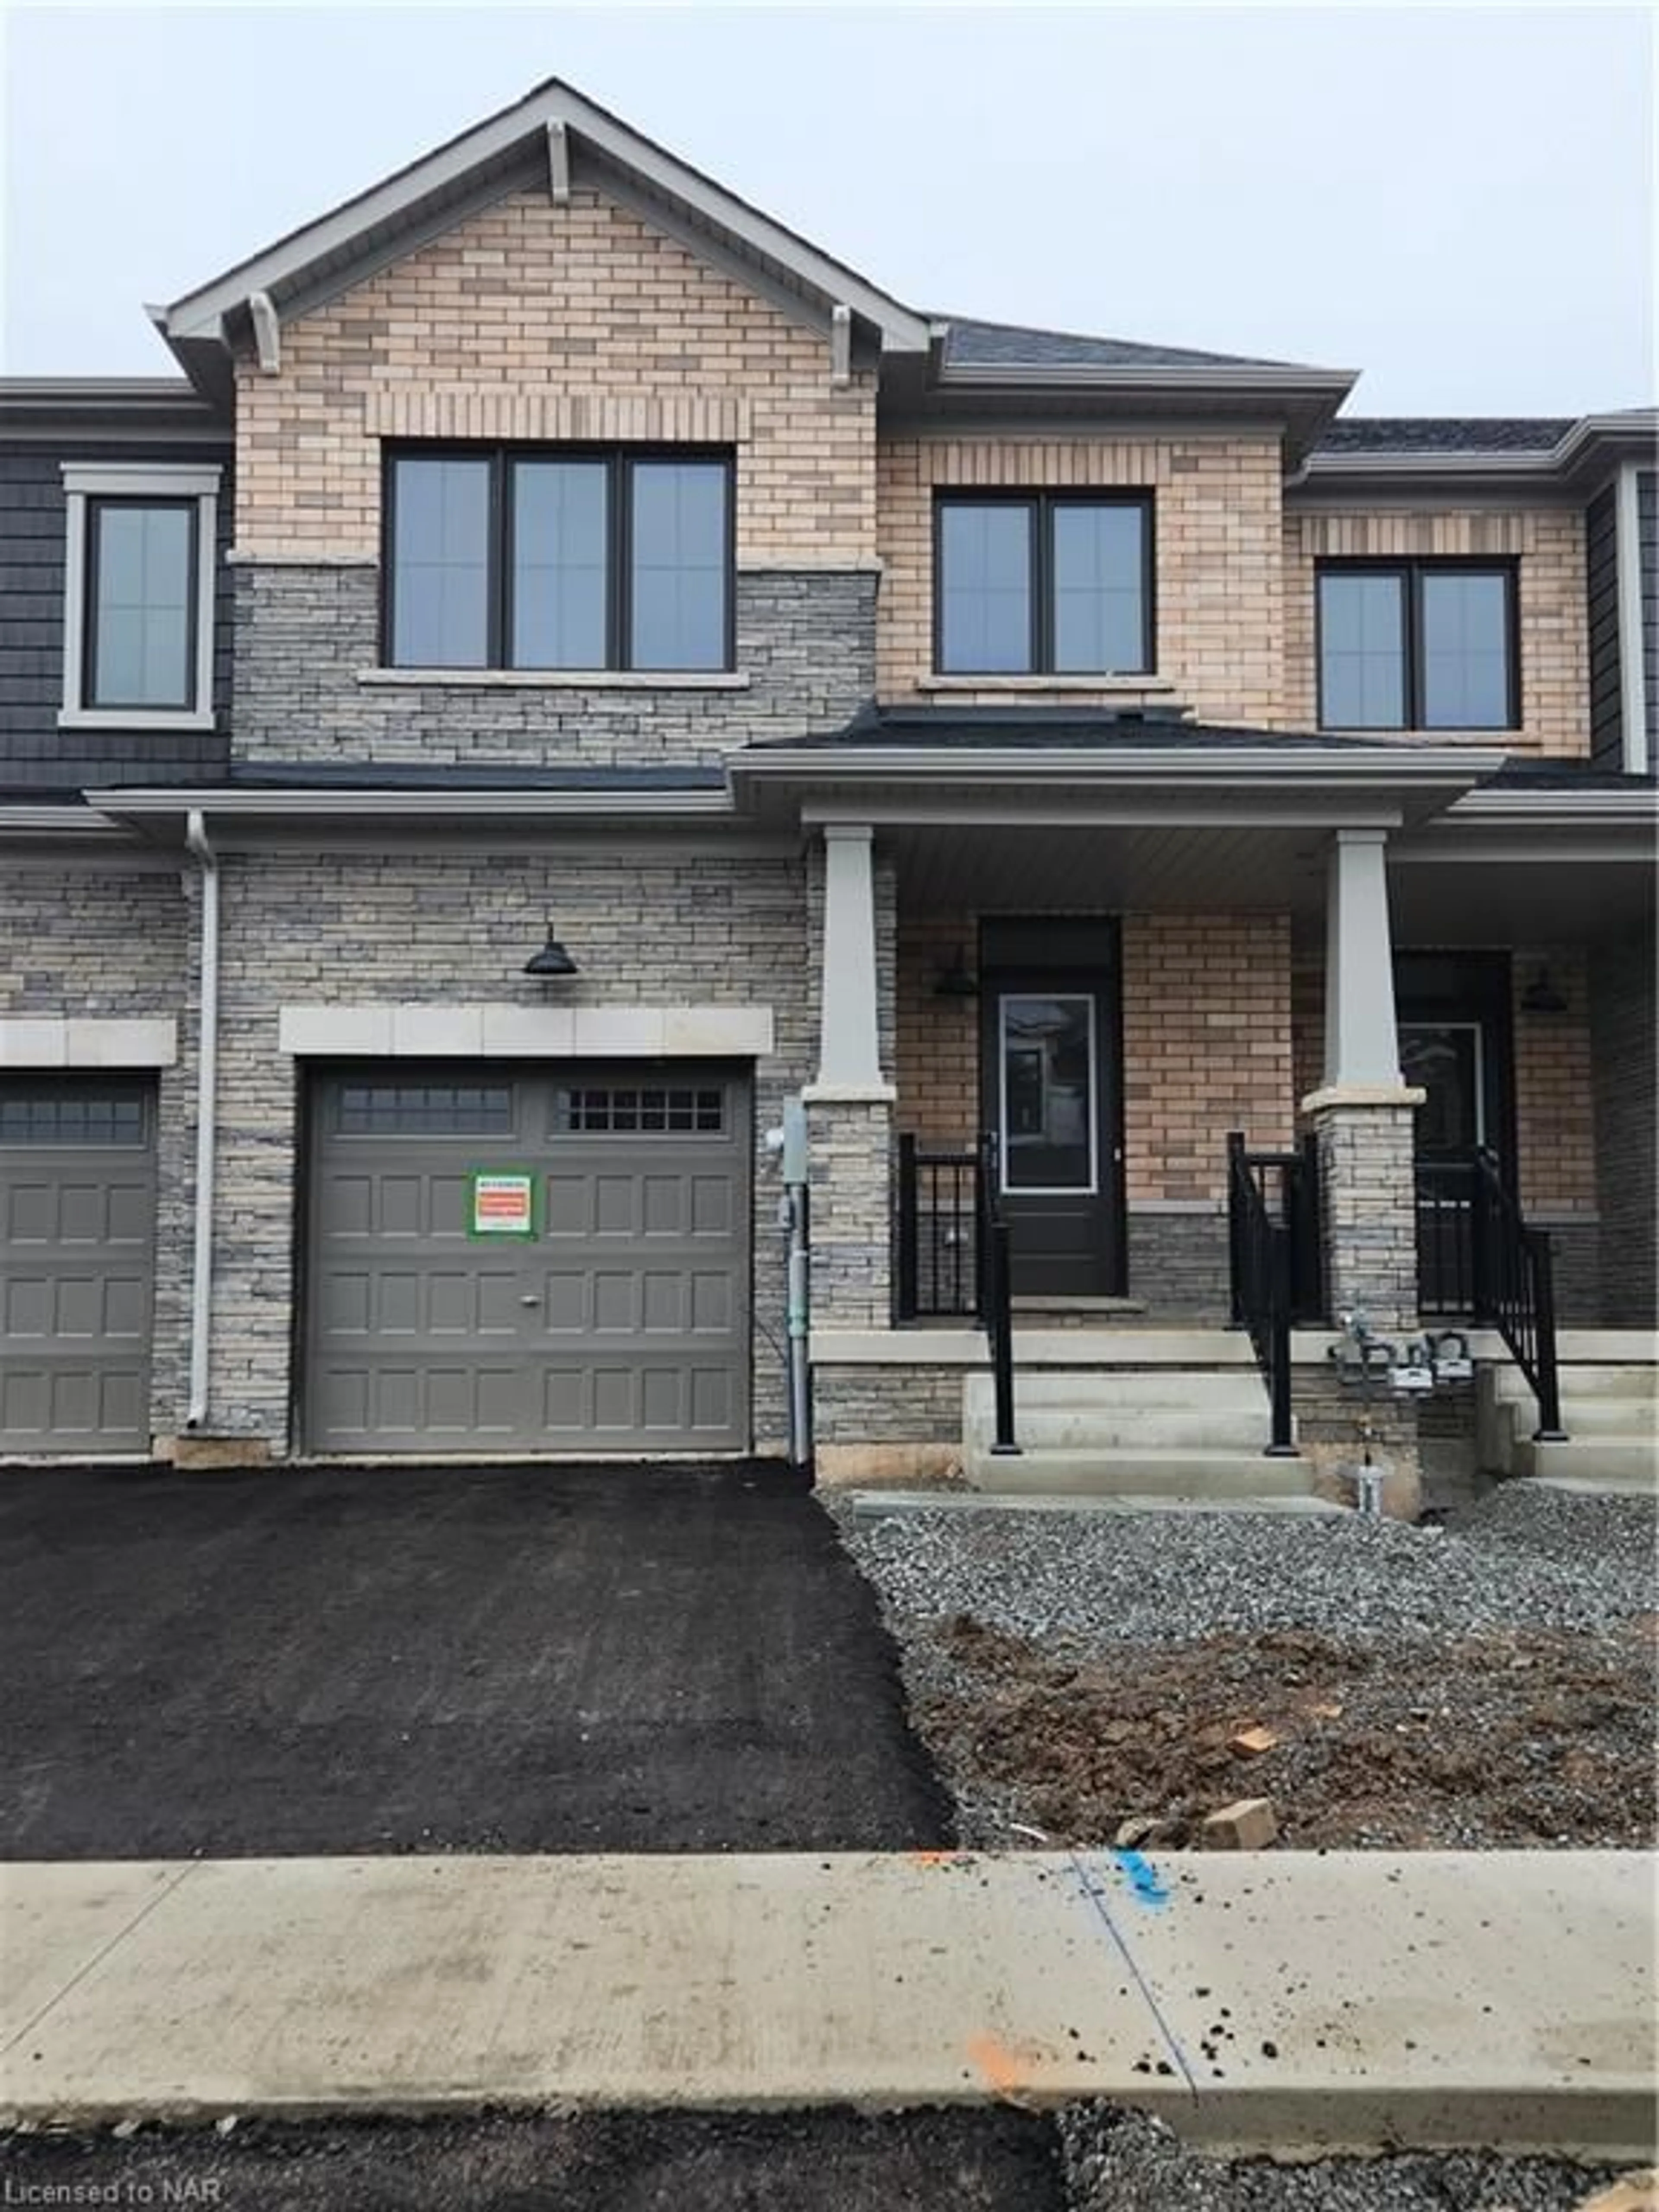 Home with brick exterior material for 168 Keelson St, Welland Ontario L3B 0M4